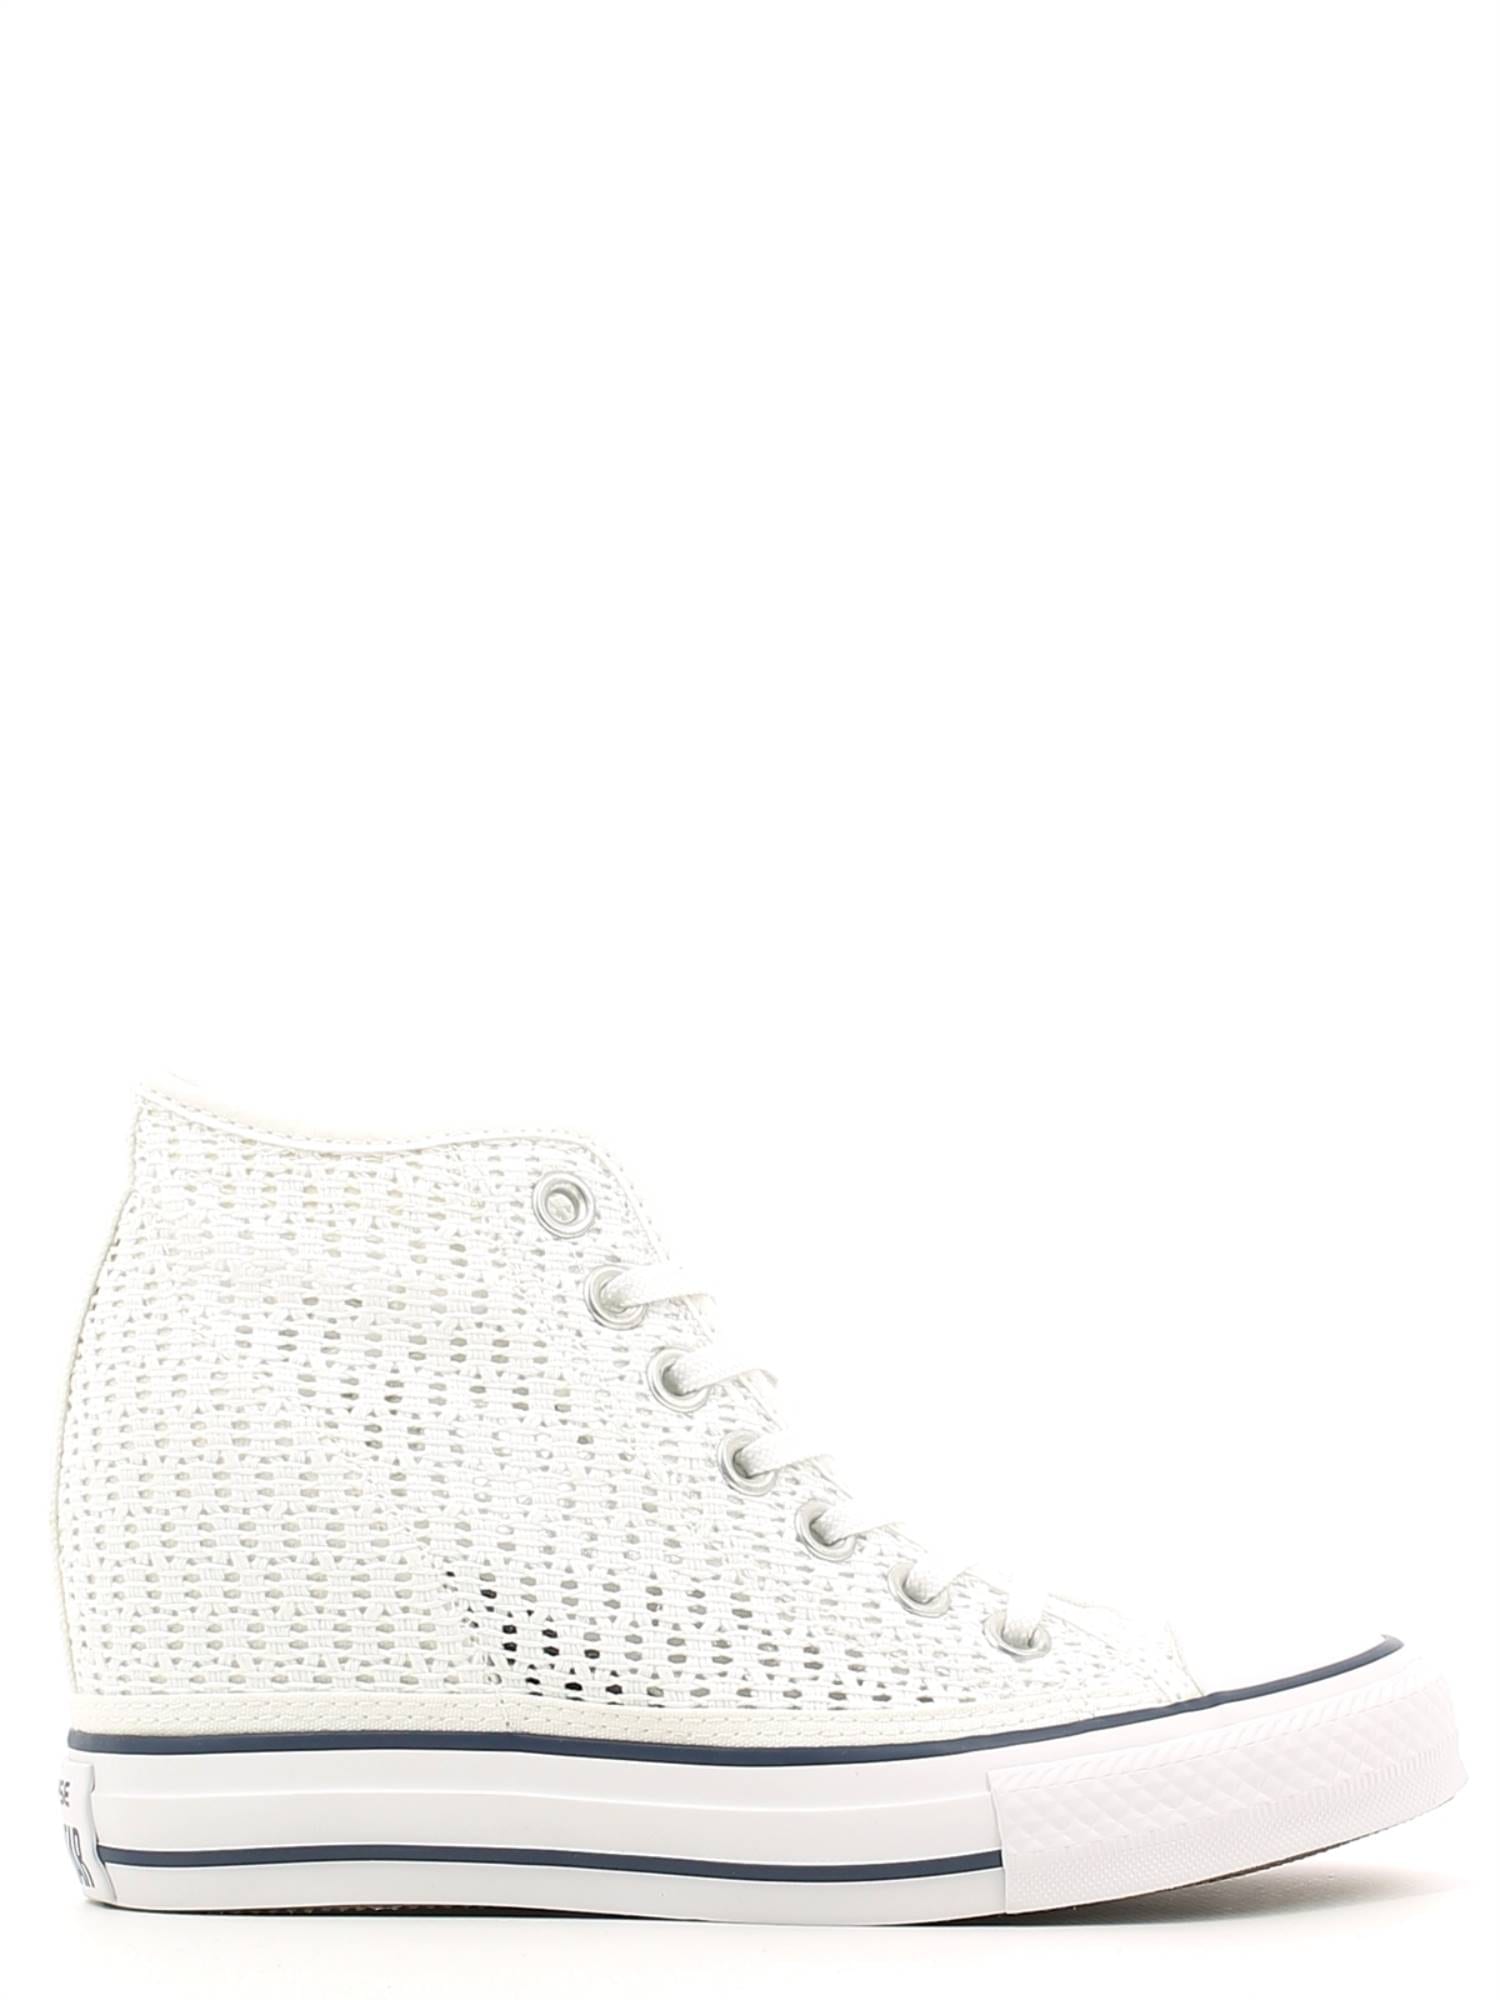 Converse : Chuck Taylor All Star mid lux tiny crochet White/white | o-zone  shop